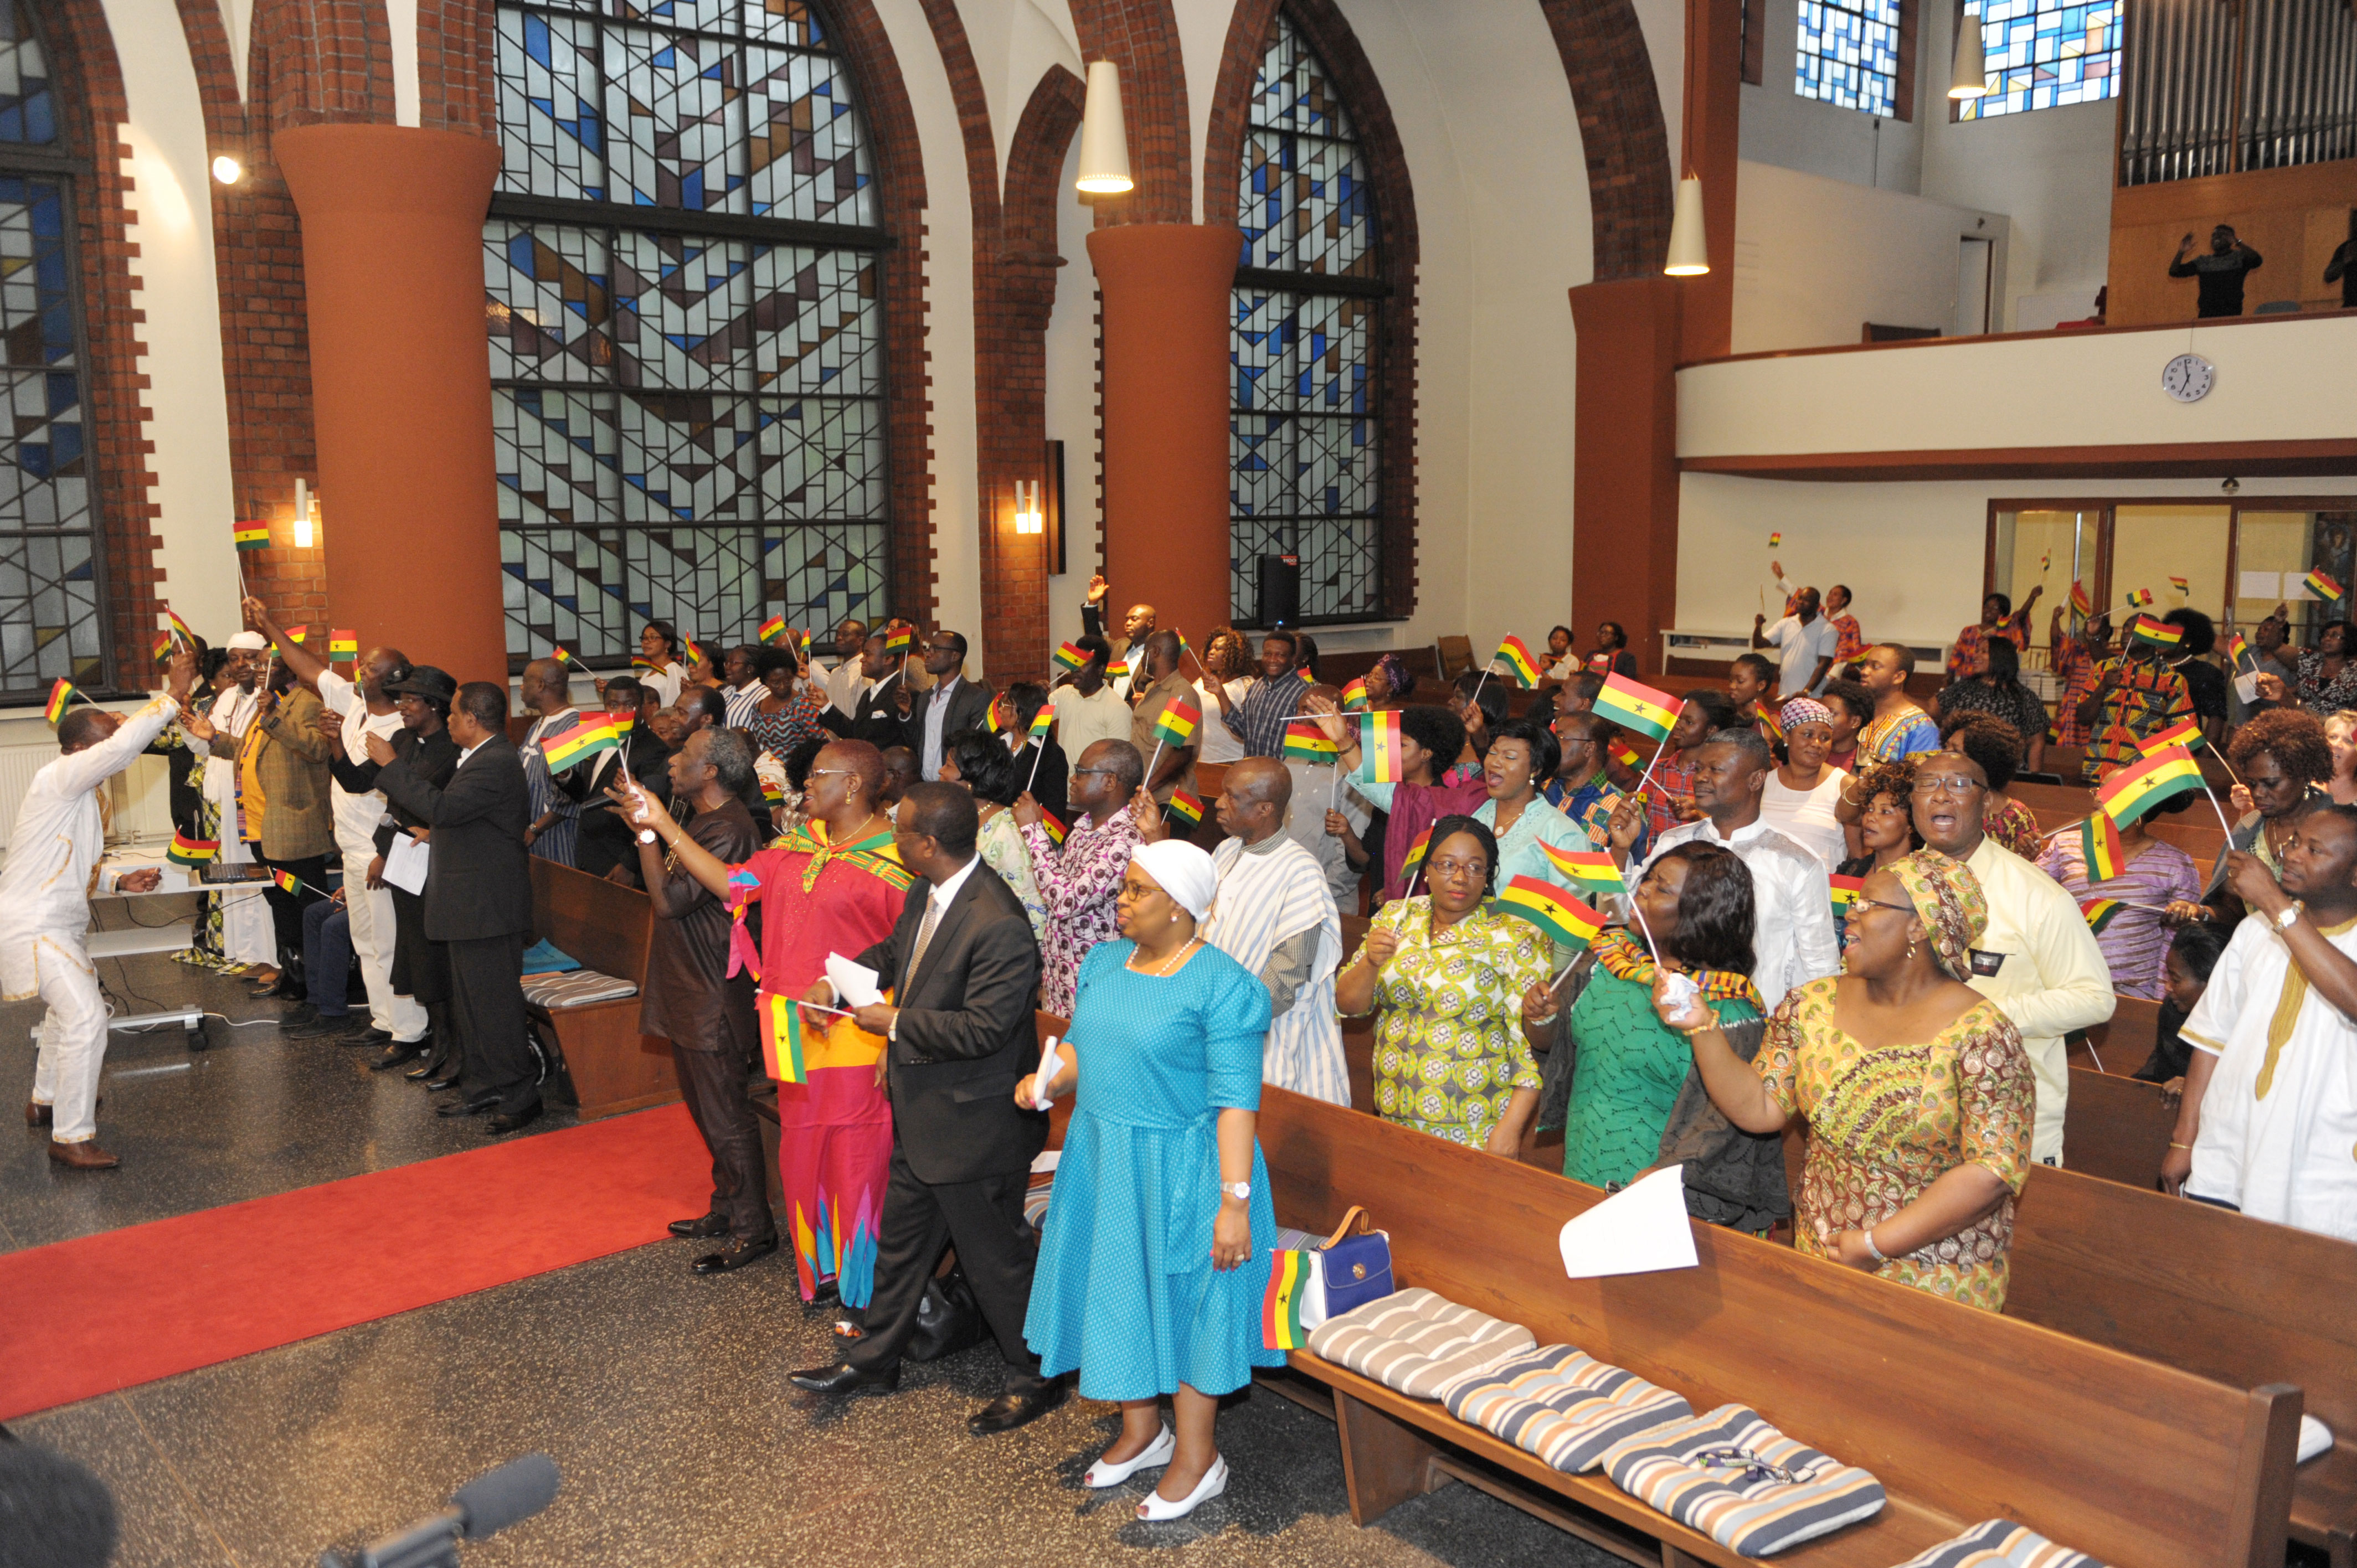 Ghanaians in Germany prayed for a peaceful election, unity in the country before and after the elections 